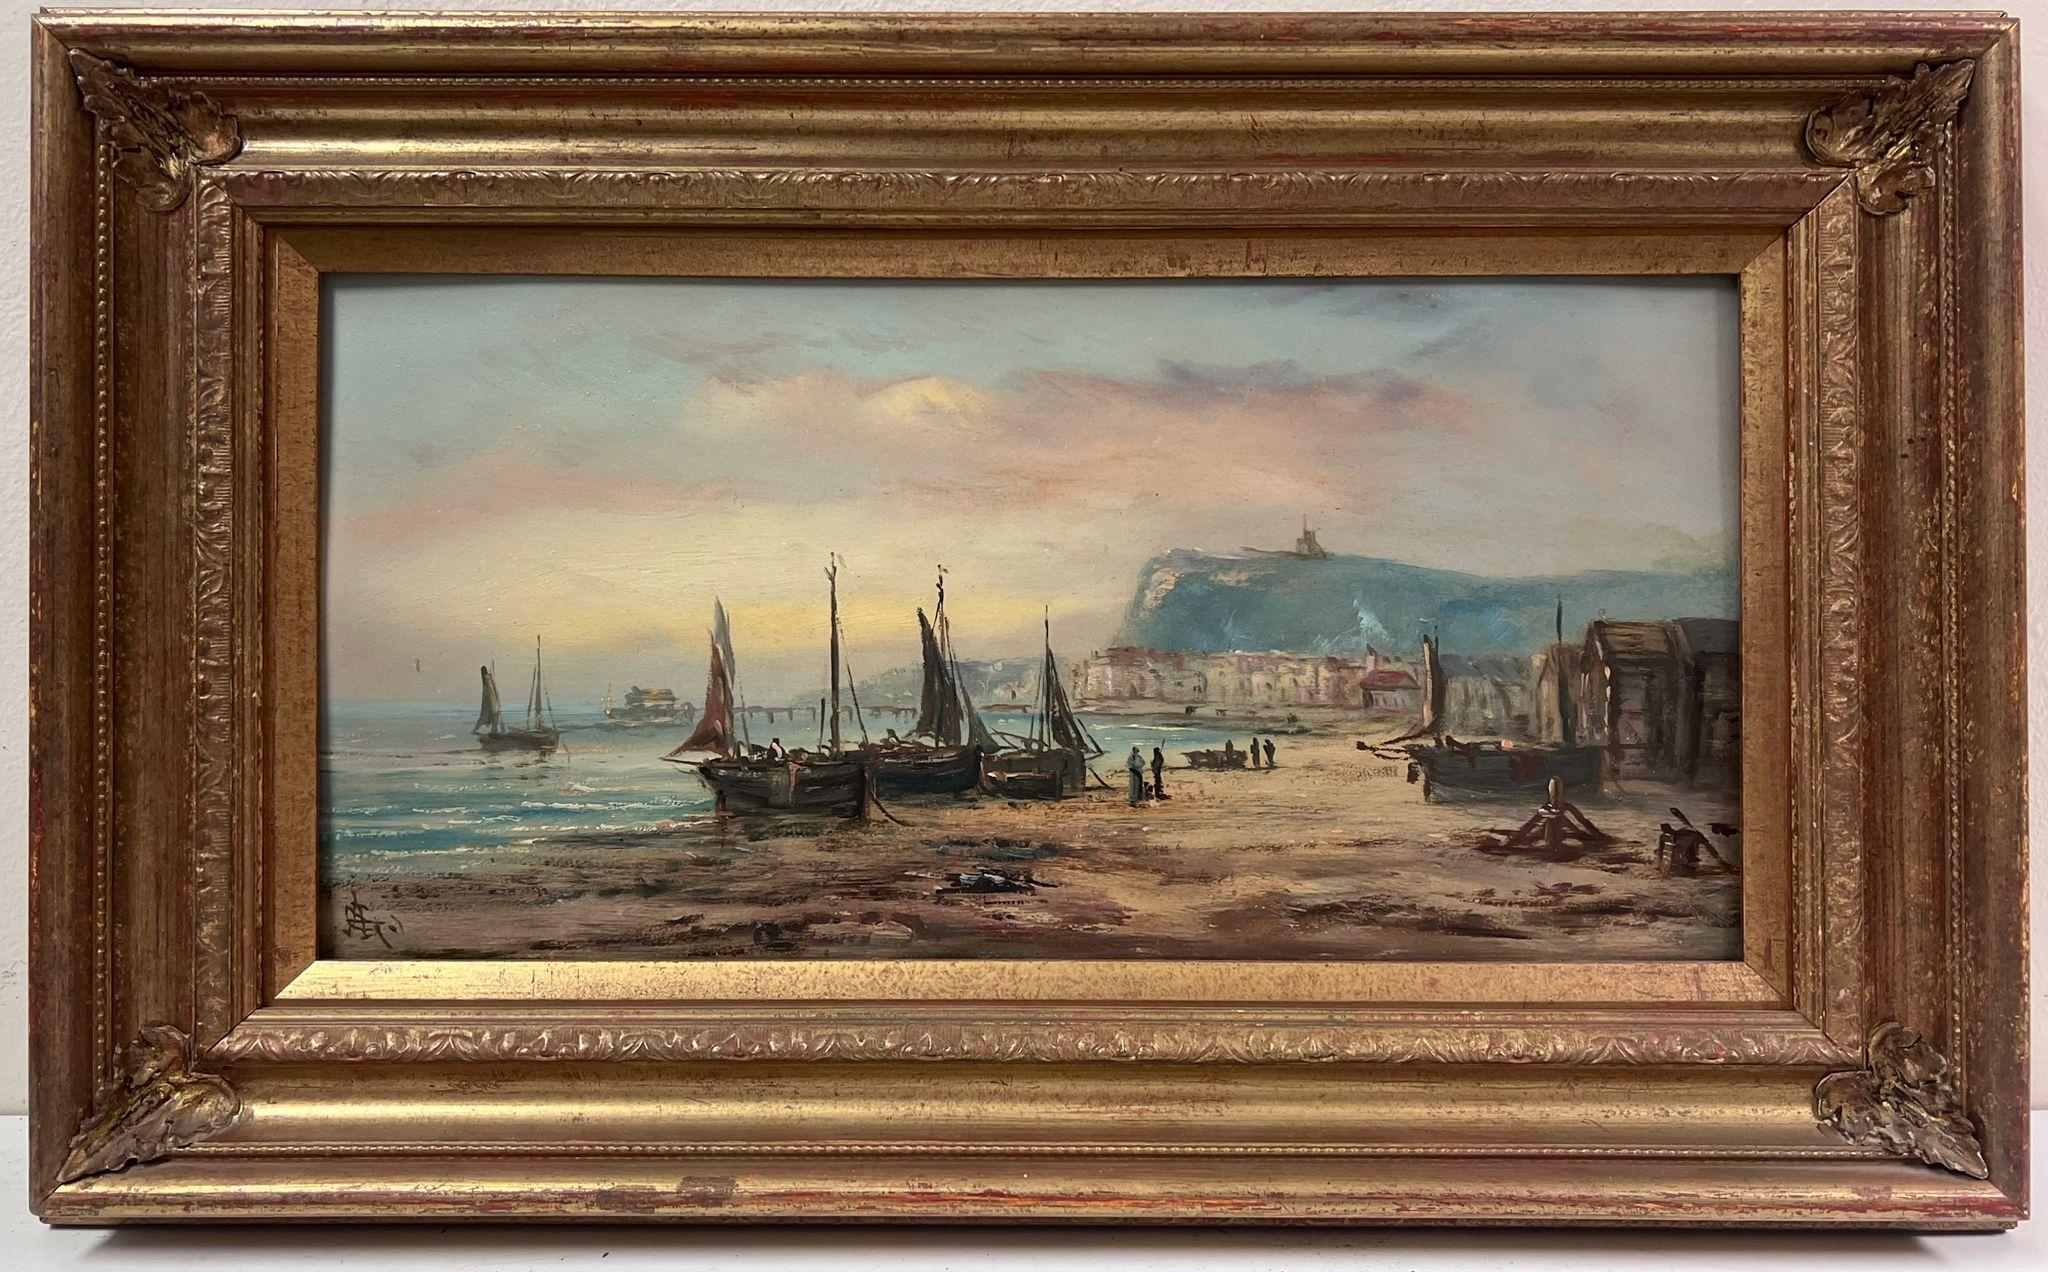 Victorian English Oil Painting Fisherboats on Beach Coastline & Figures Sunset